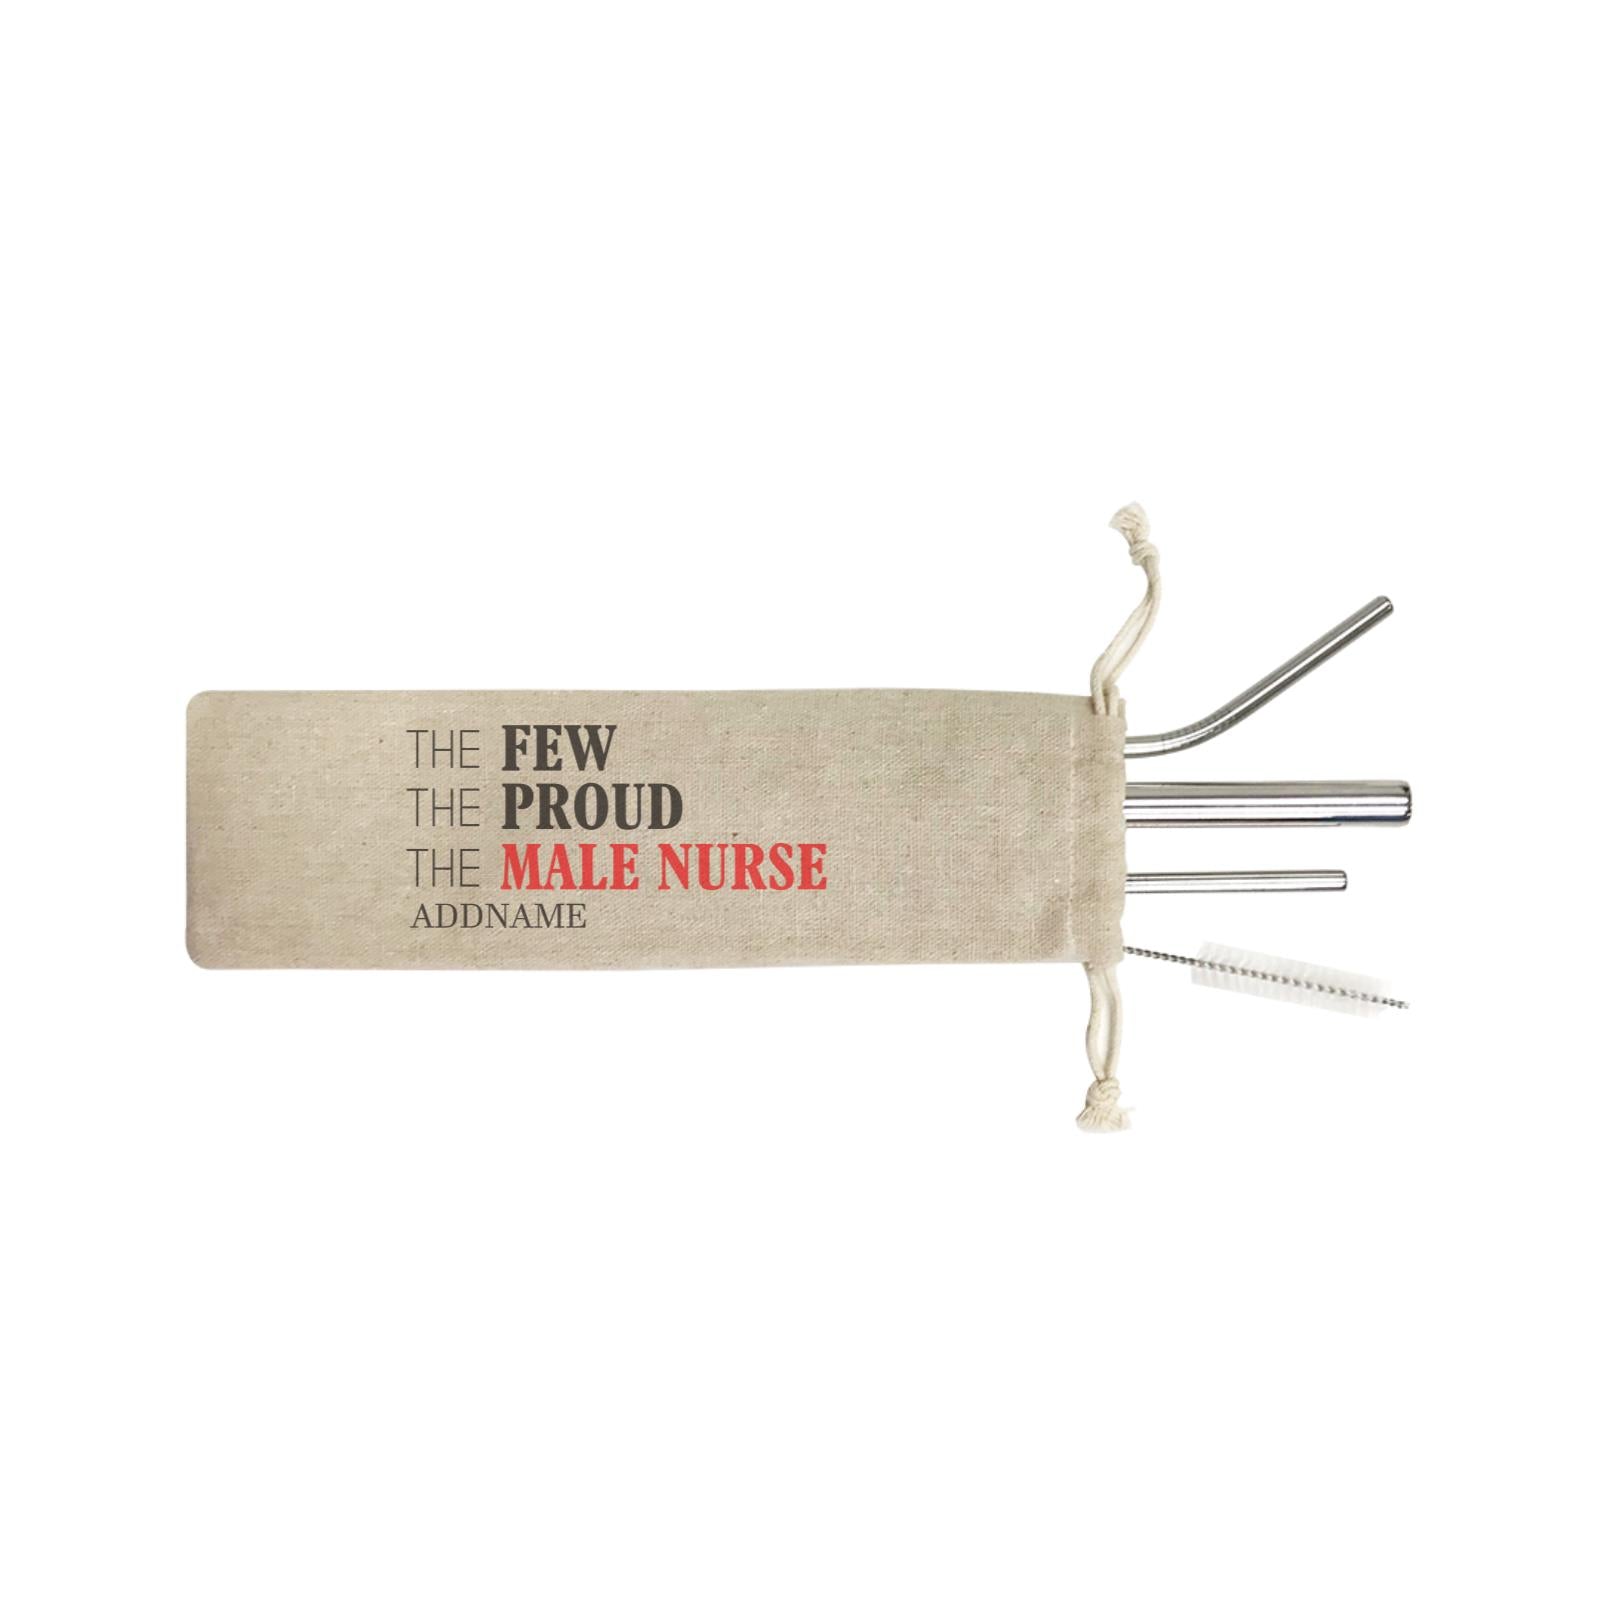 The Few, The Proud, The Male Nurse SB 4-in-1 Stainless Steel Straw Set In a Satchel